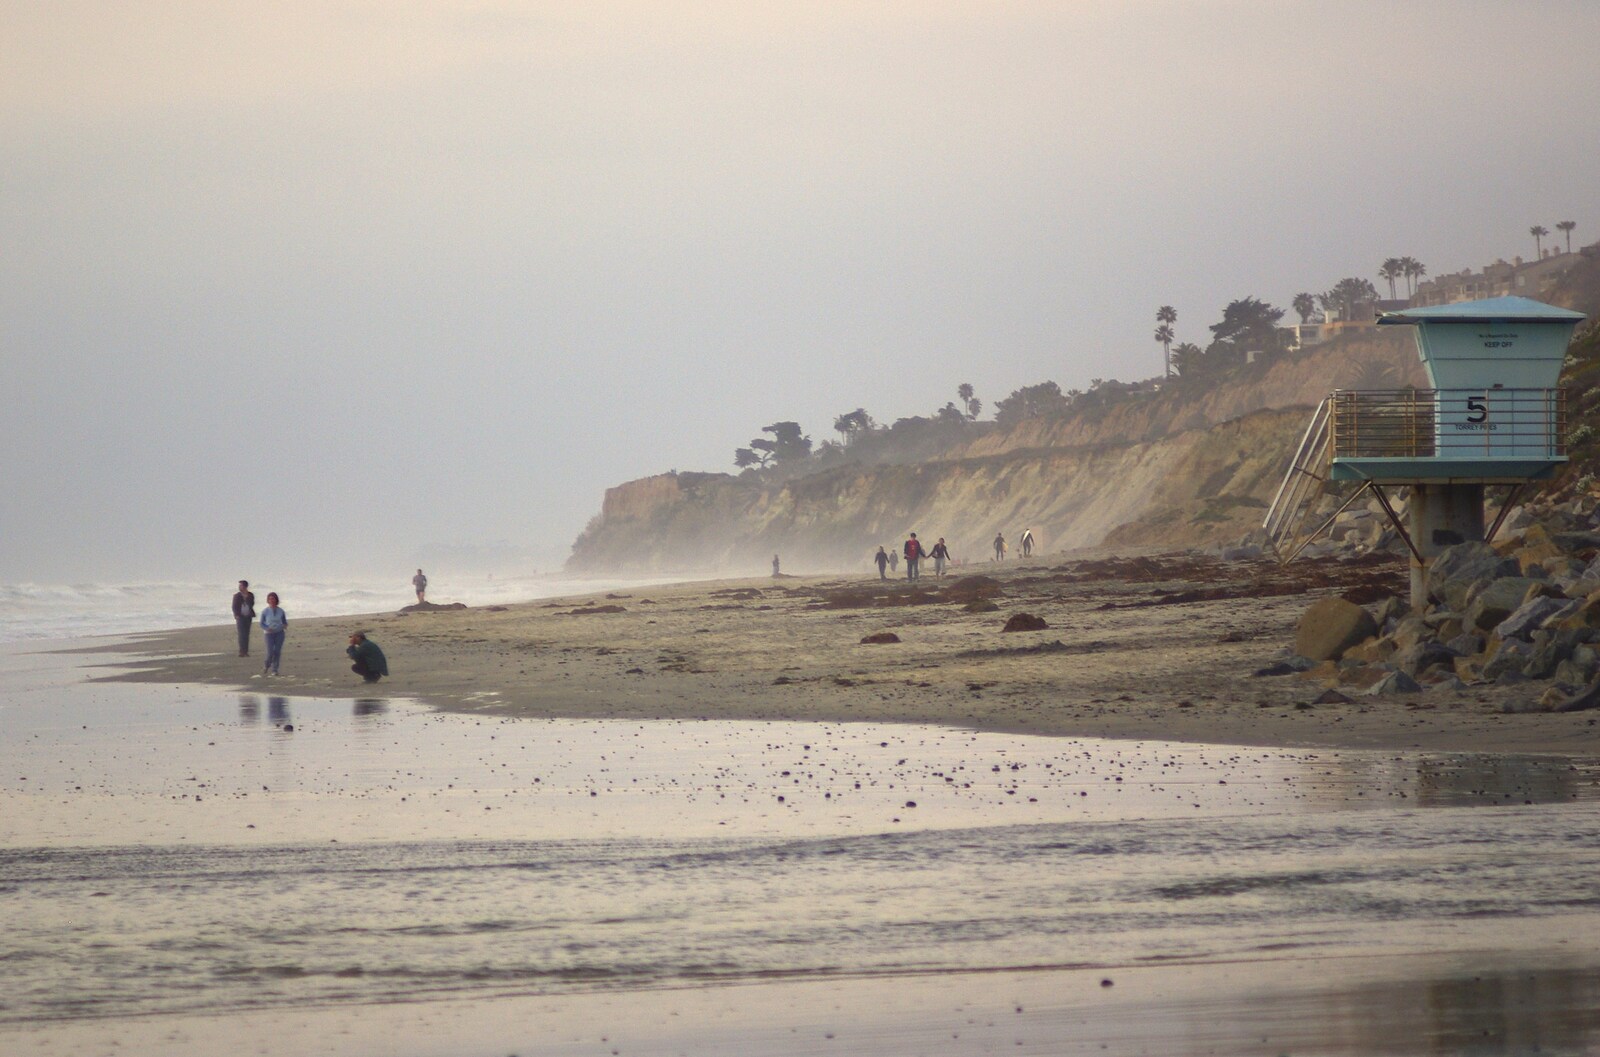 People on the beach from San Diego 8: The Beaches of Torrey Pines, and Ramona, California, USA - 29th February 2008